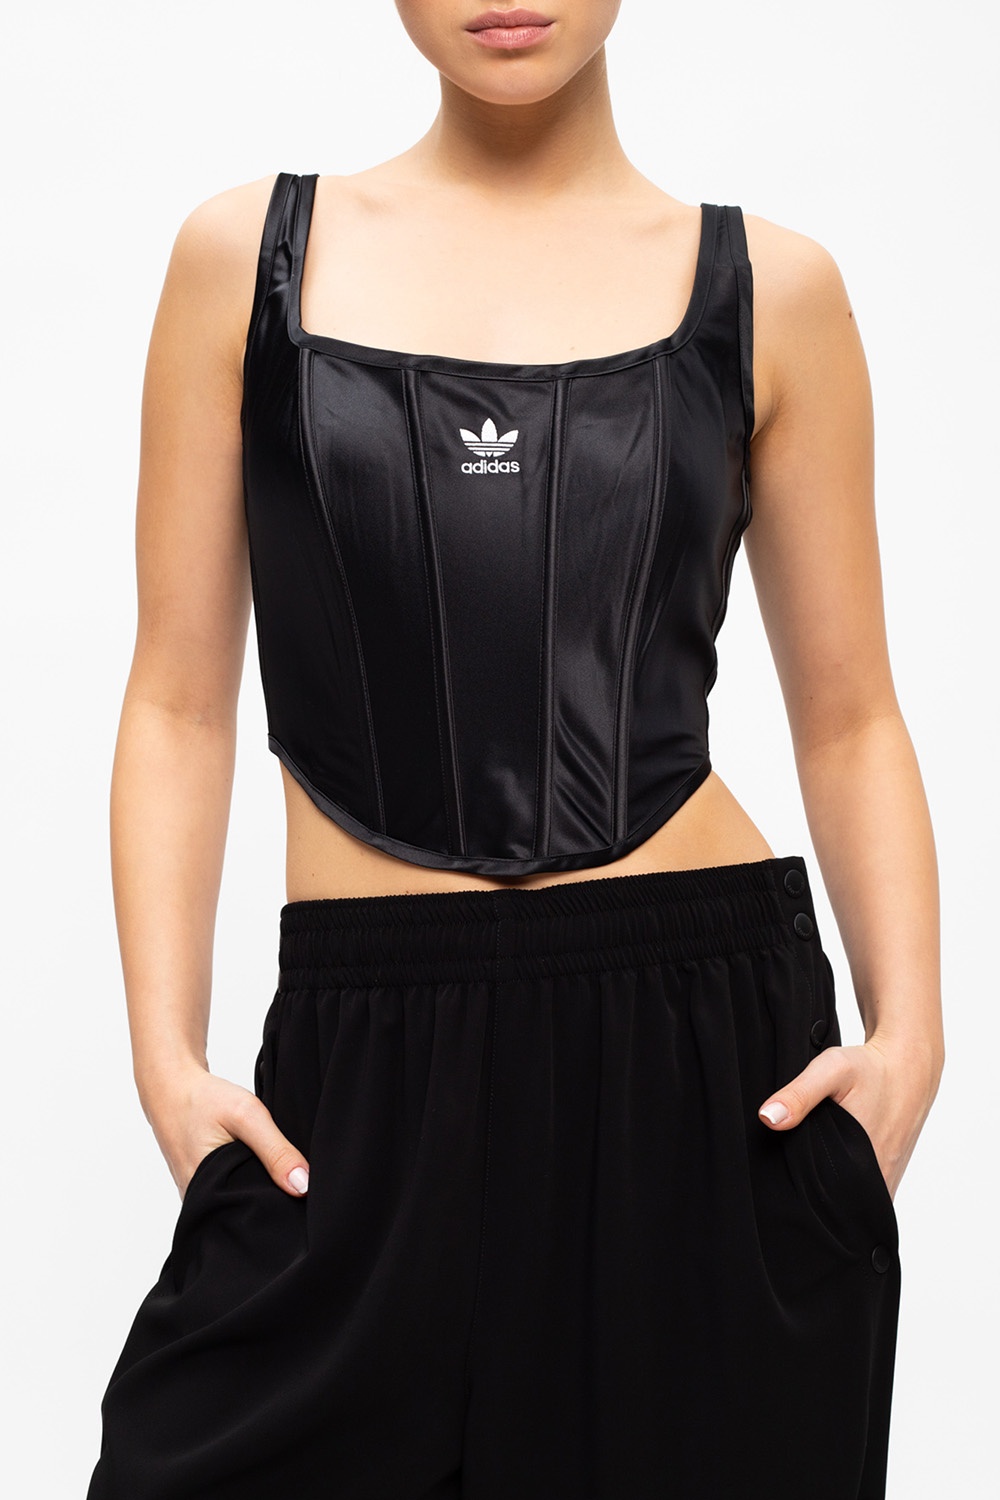 Adidas corset-style square-neck Cropped Top - Farfetch